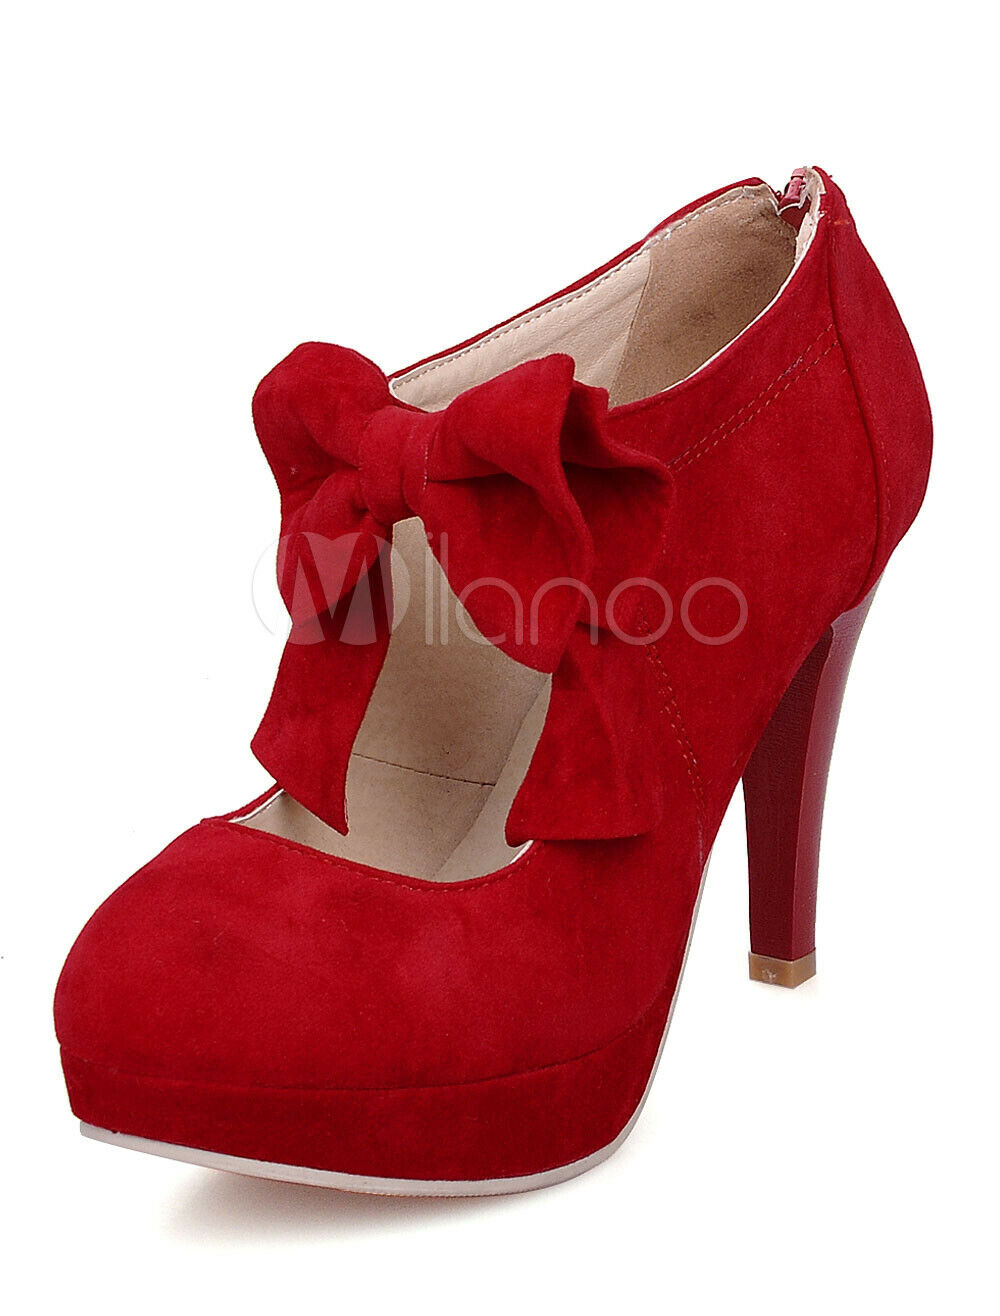 Red High Heels Suede Platform Round Toe Mary Jane Bow-Adorned Shoes New Size 7